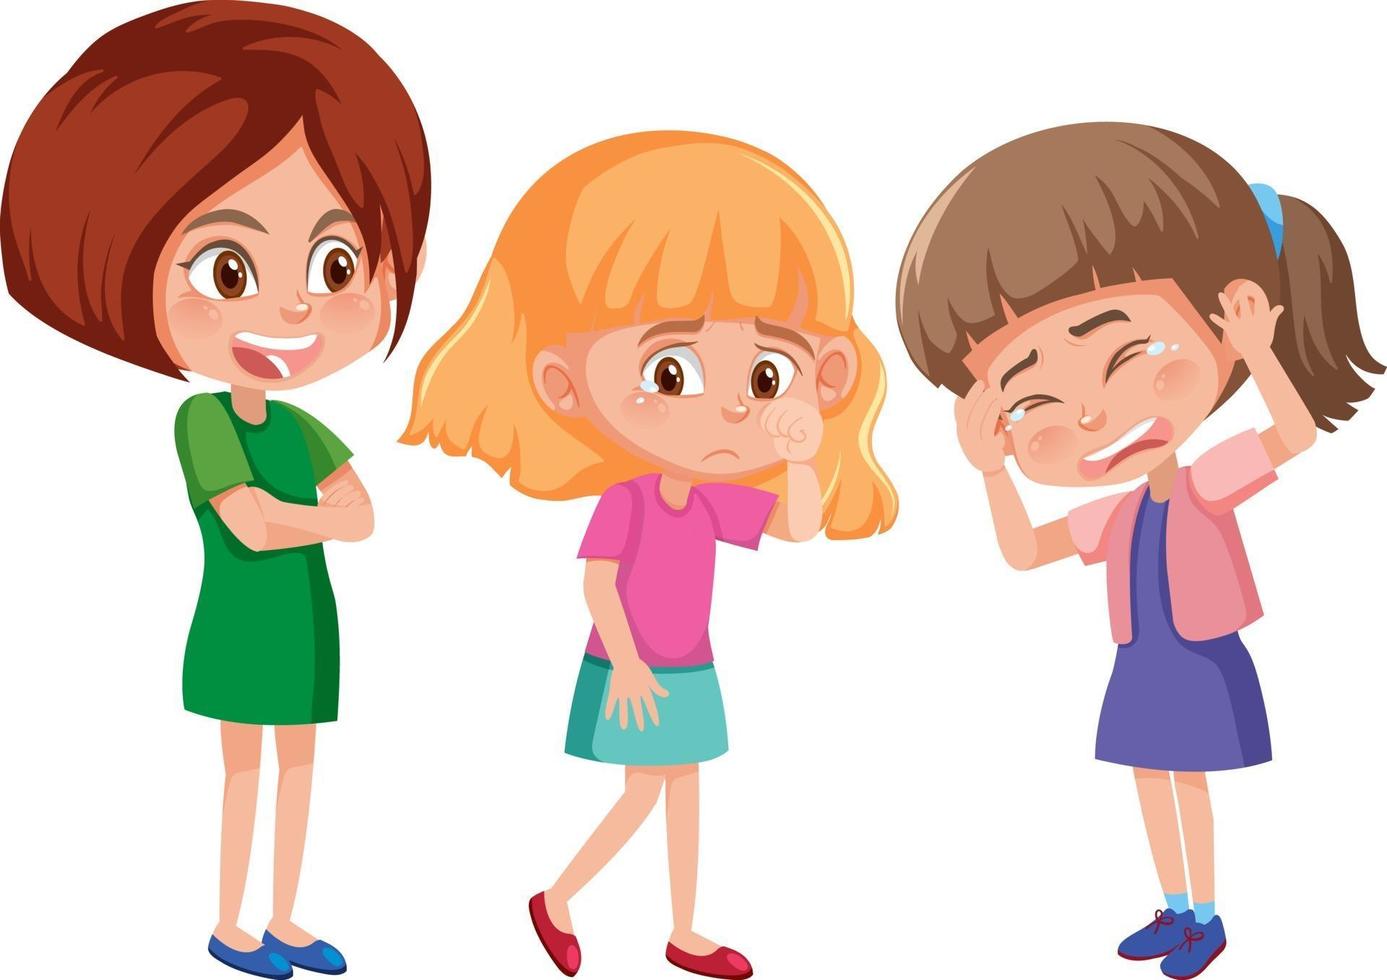 A young woman bullying two little girls cartoon character vector